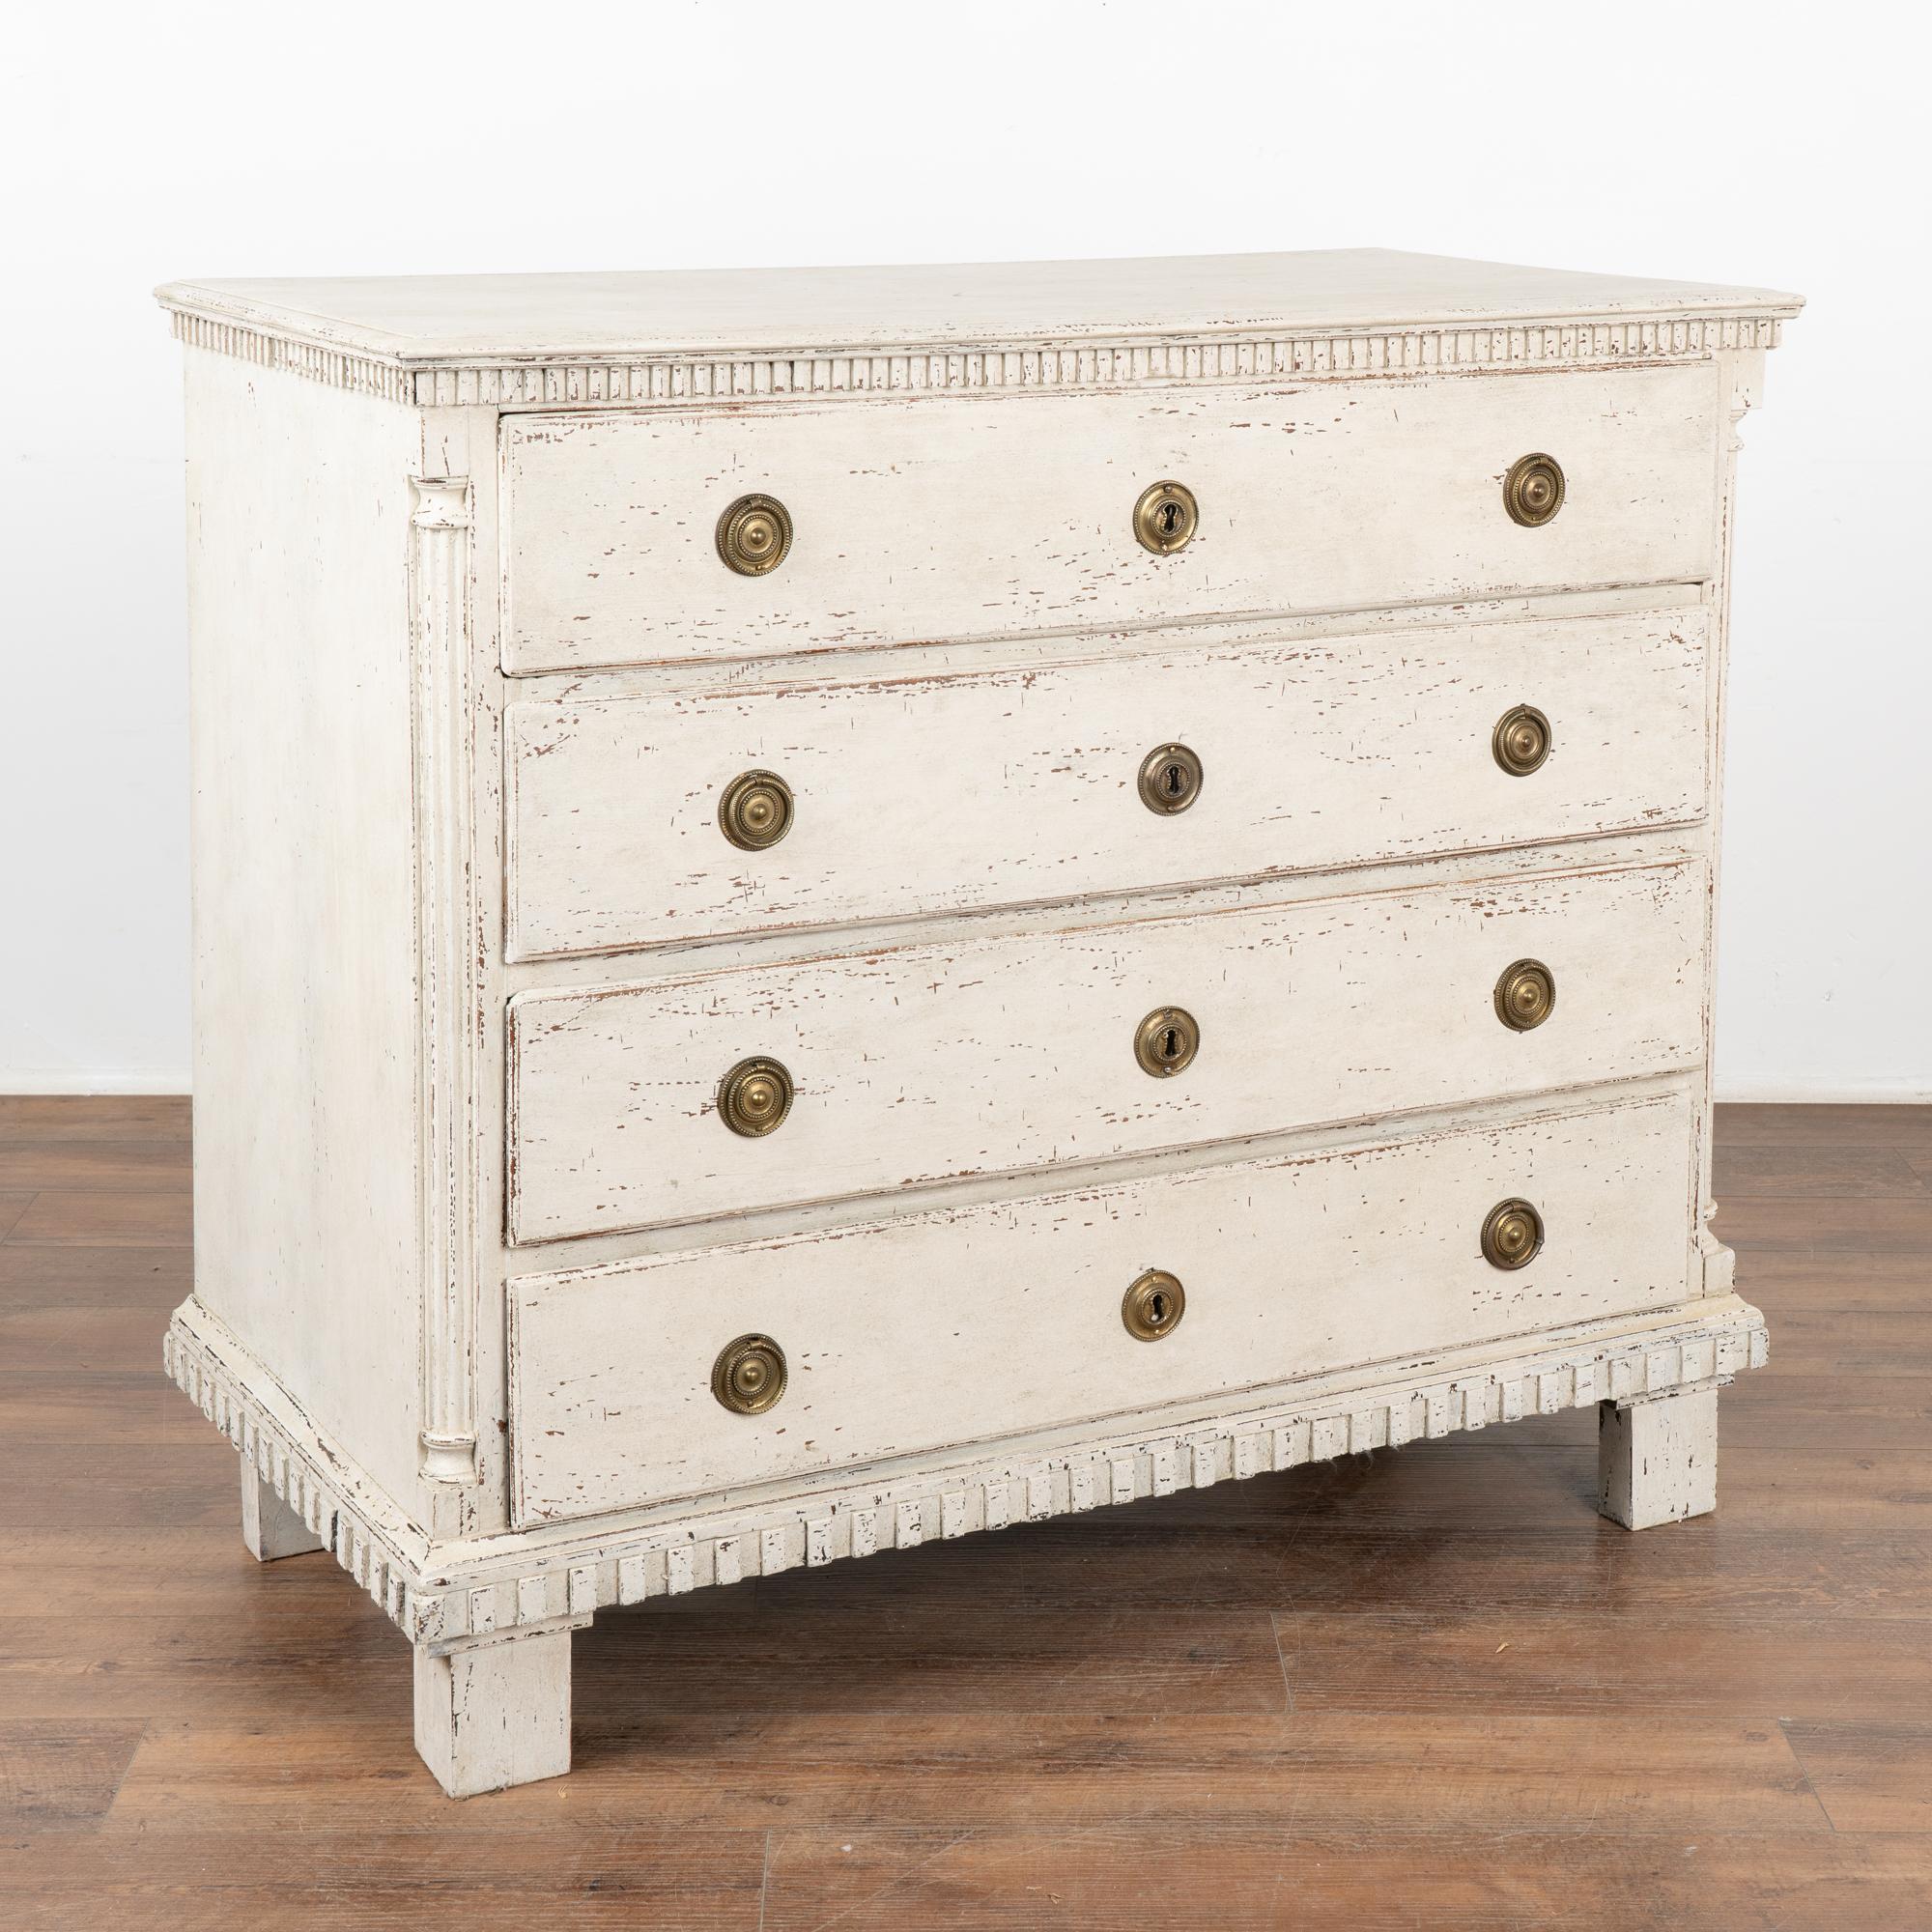 Lovely oak chest of four drawers with dentil molding carved along top and skirt with fluted half columns along canted sides.
The newer, professionally applied antique white painted layered finish adds a touch of grace that fits the age of this large